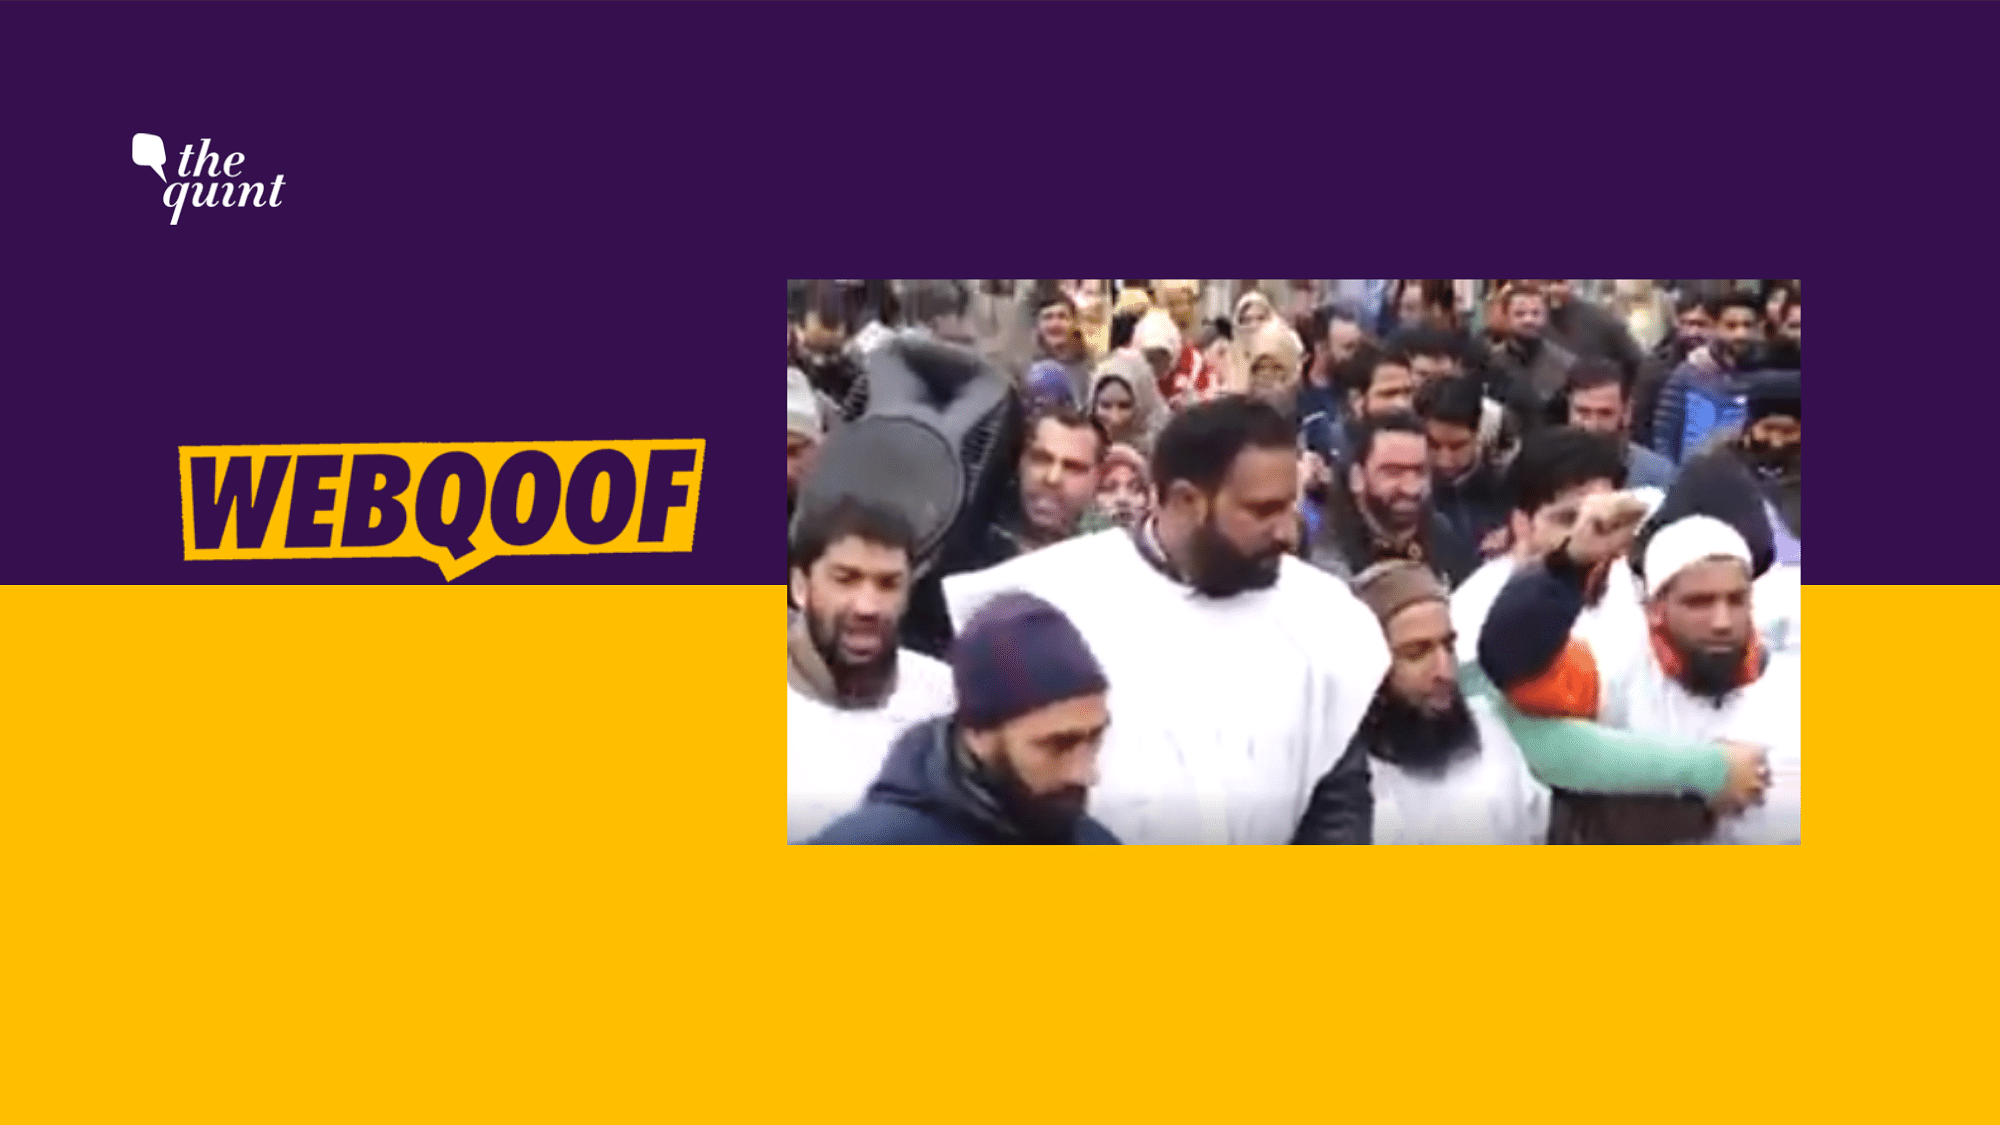 A YouTube video falsely claims that it shows a recent protest held in Kashmir against the abrogation of Article 370